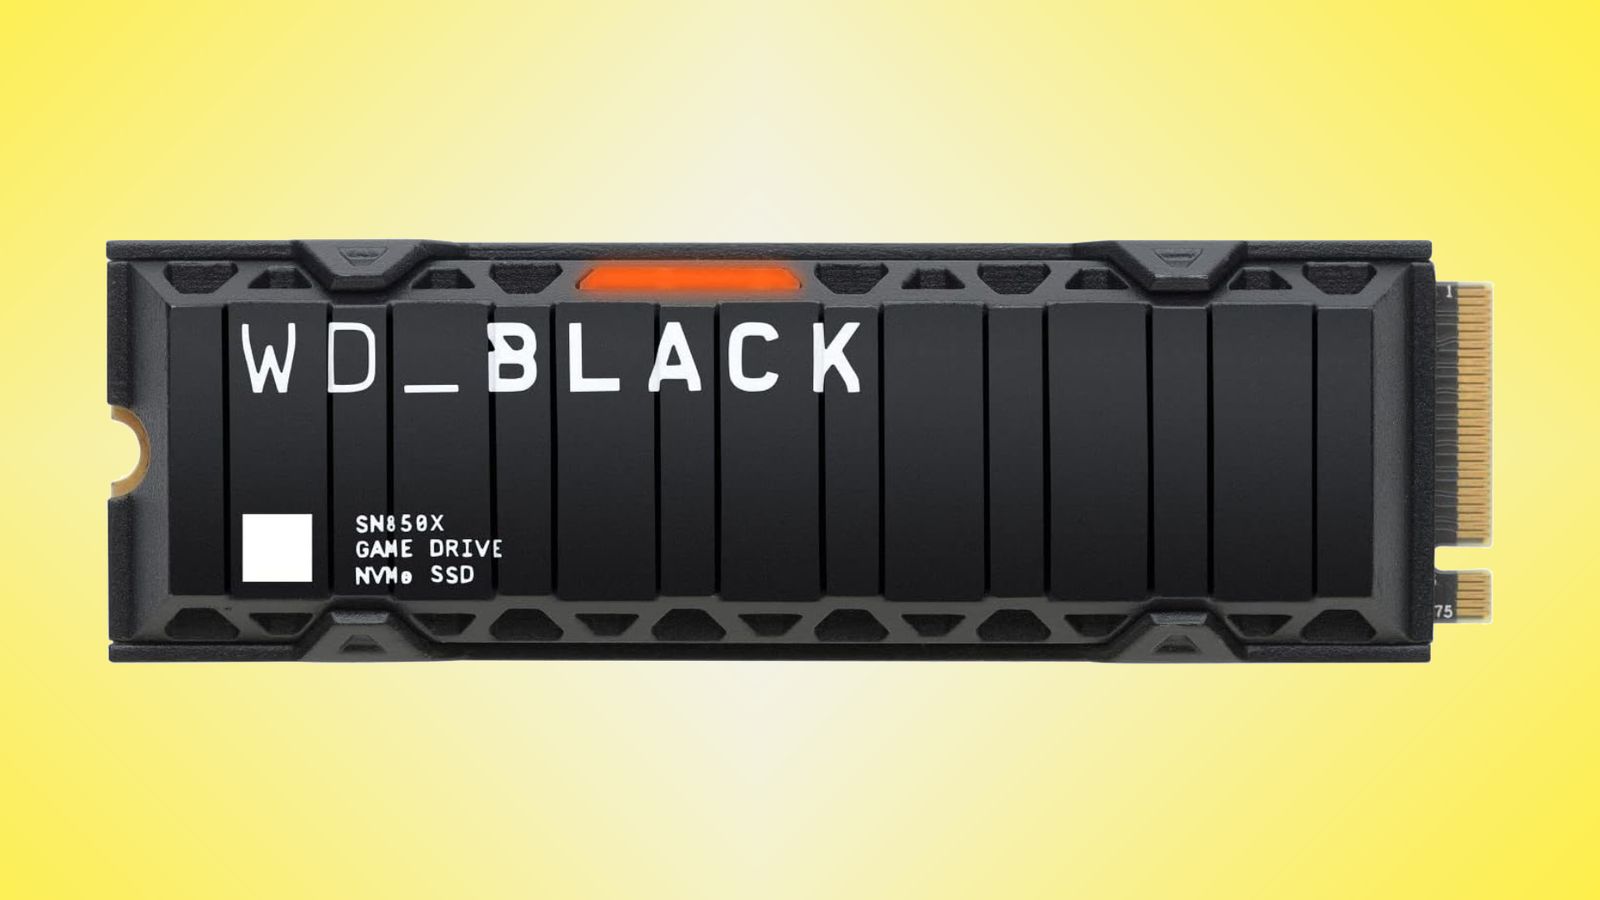 WD_BLACK SN850X product image of a black SSD featuring white branding, gold connections, and an orange detail.